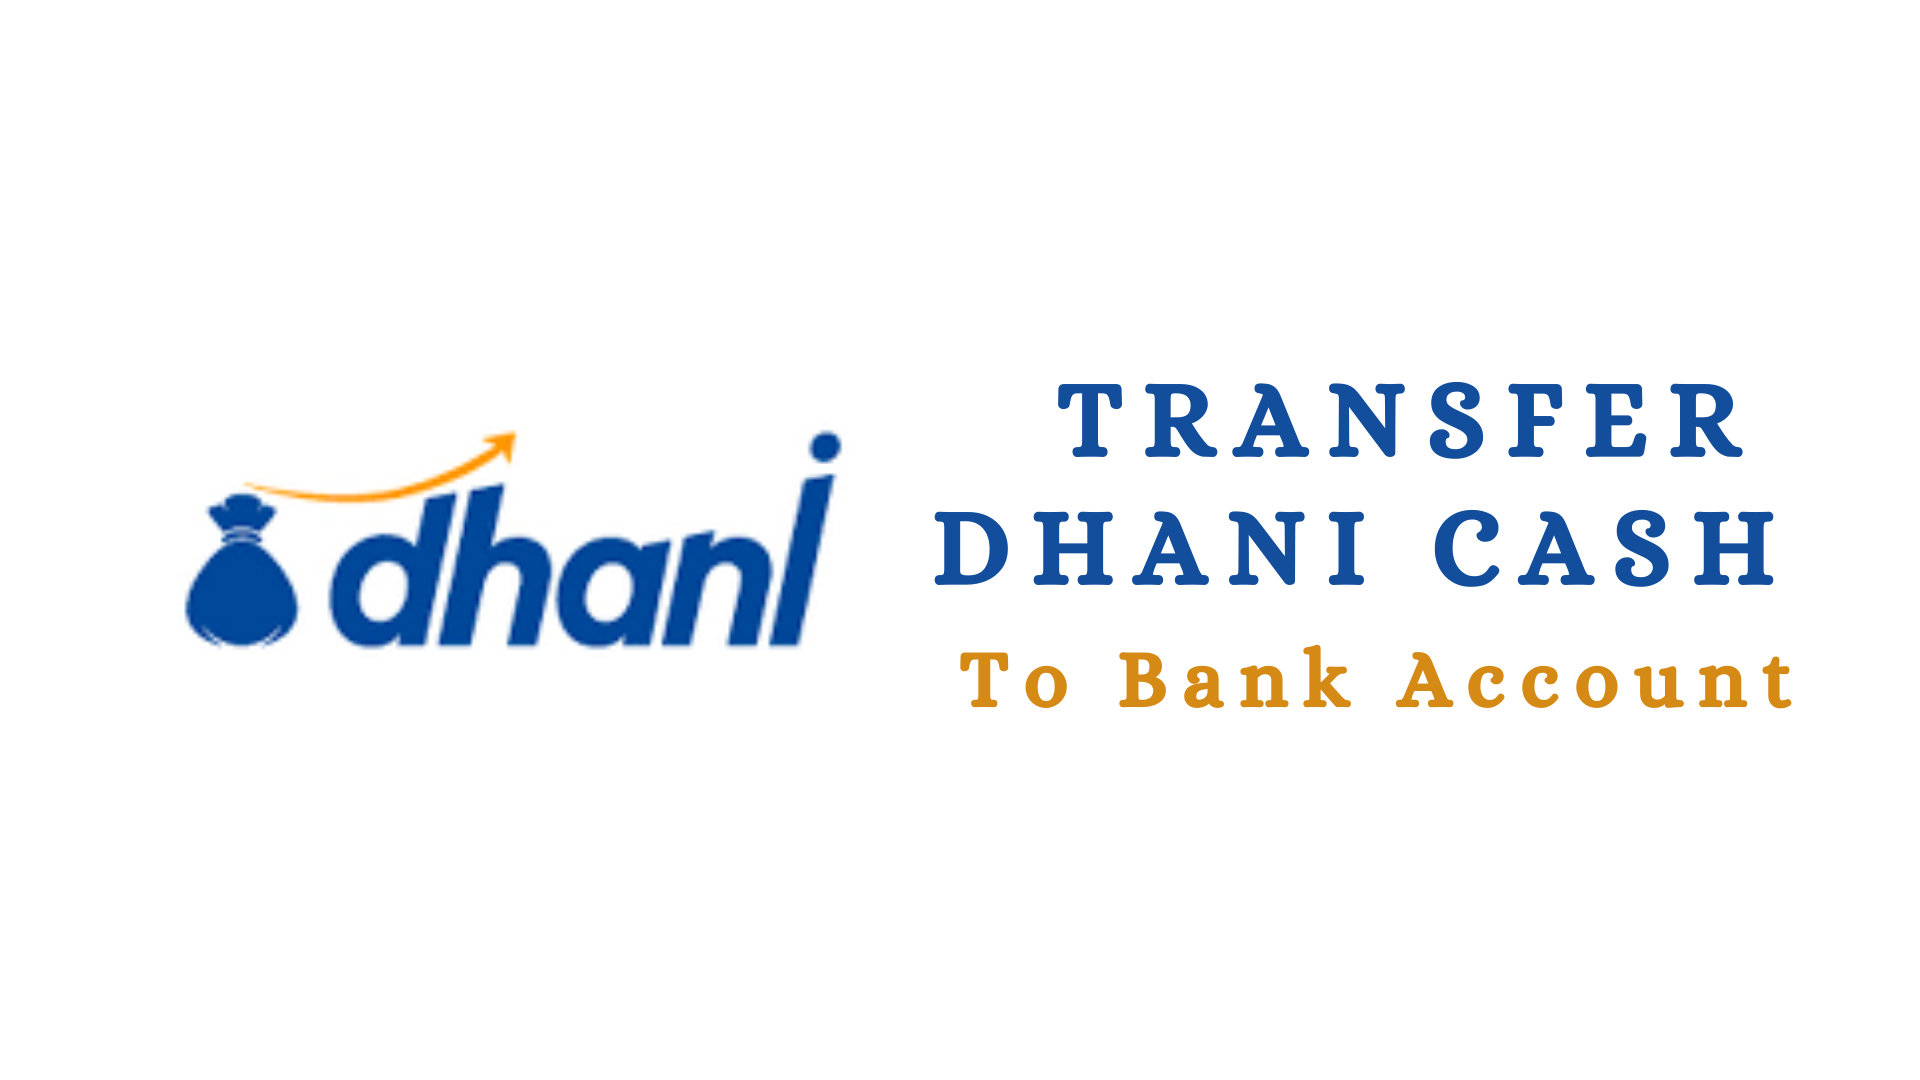 How To Transfer Dhani Cash To Bank Account?